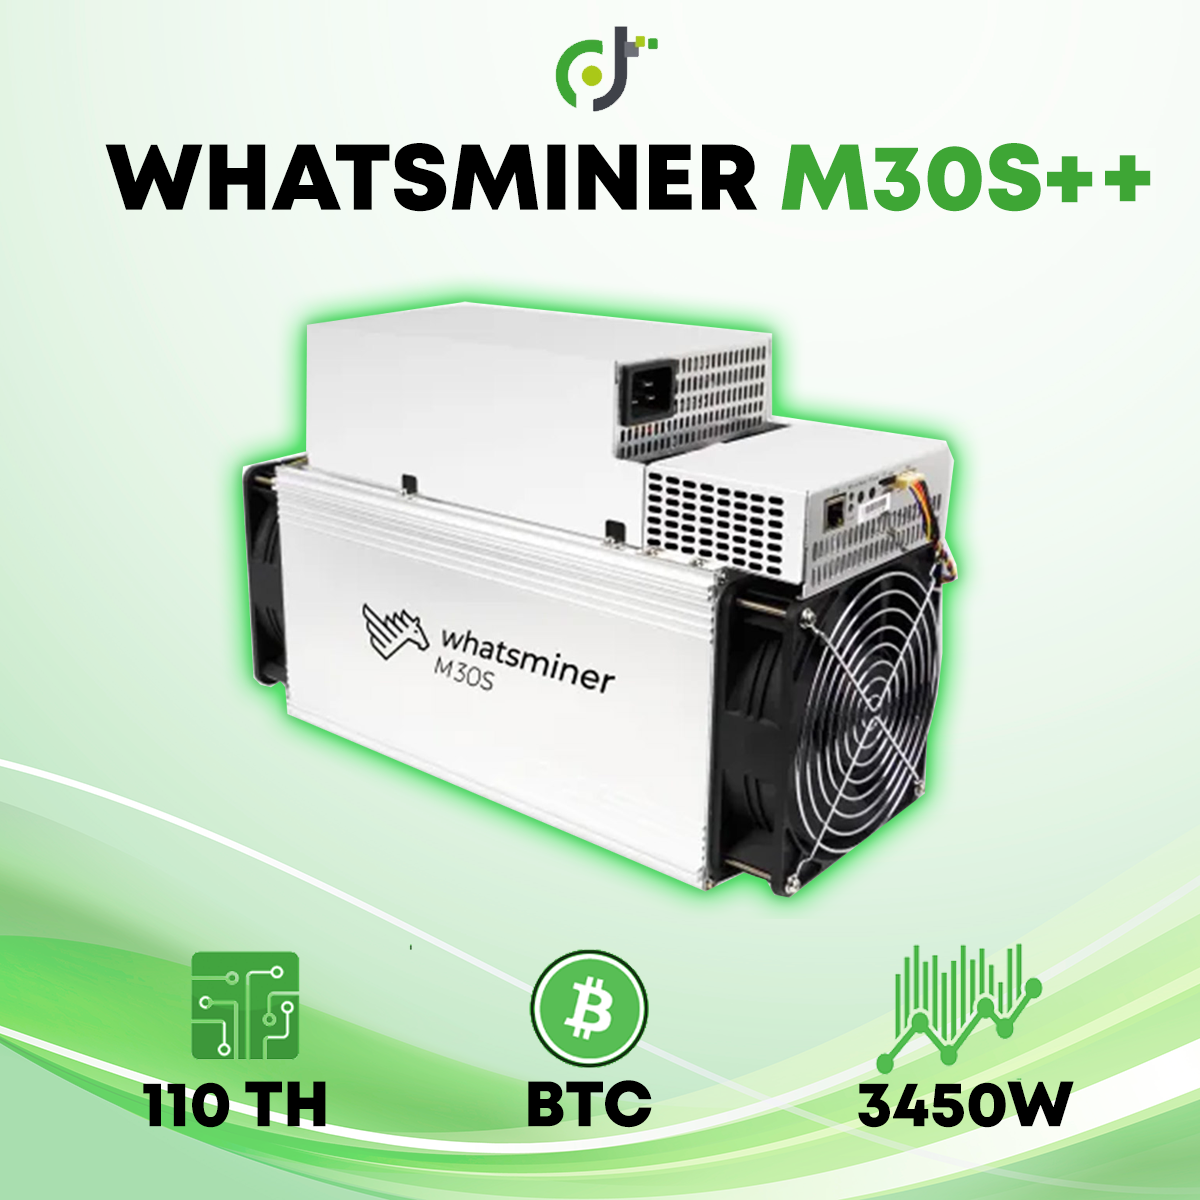 MicroBT Whatsminer M30S++ (110Th) Bitcoin Crypto ASIC Miner